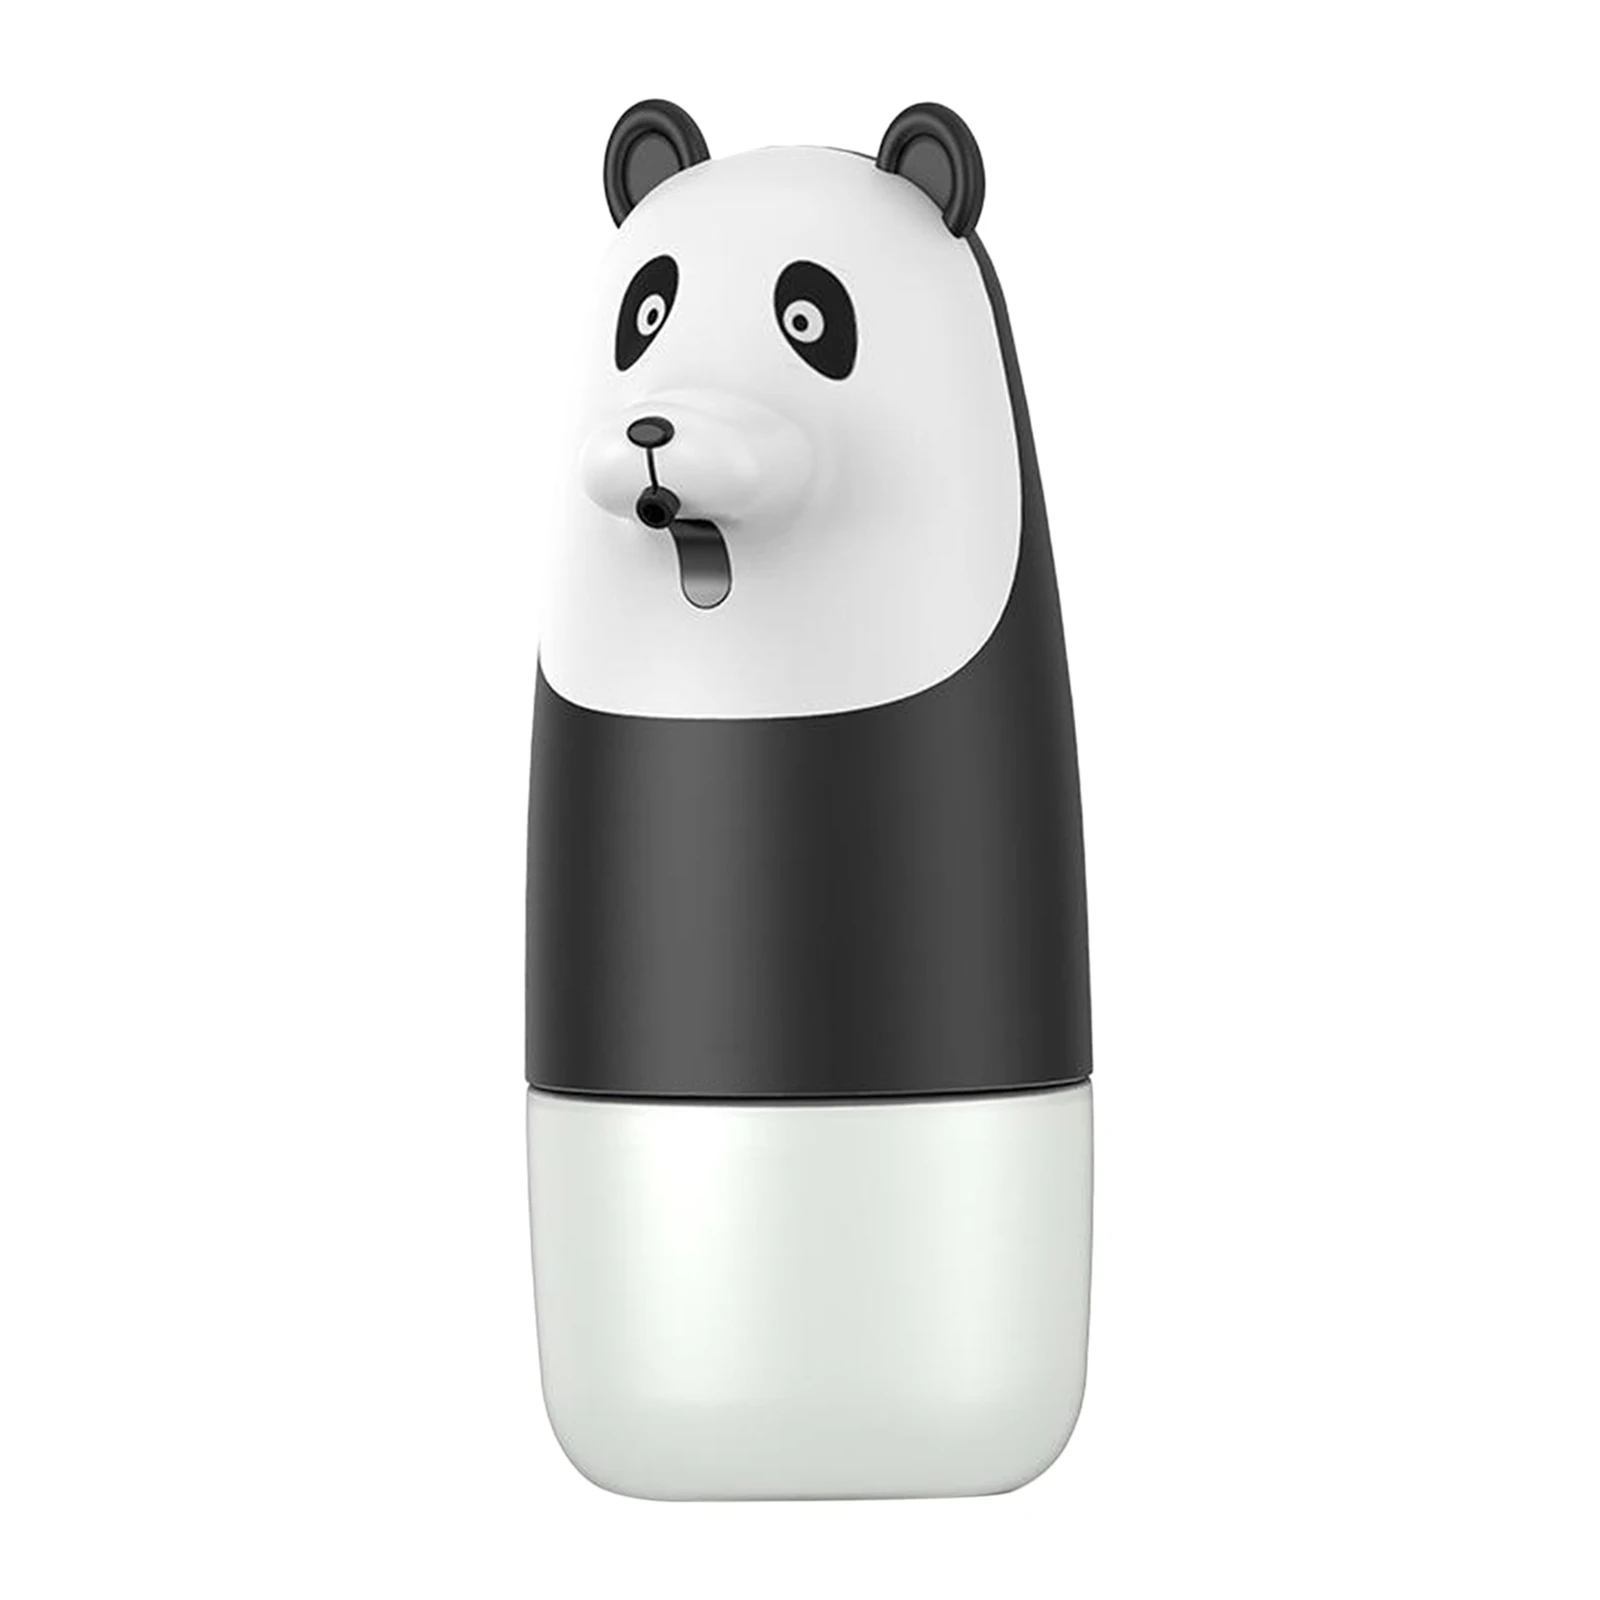 Cute Cartoon Touchless Automatic Soap Dispenser Auto Foaming Dispensers Hand Washing for Office Home